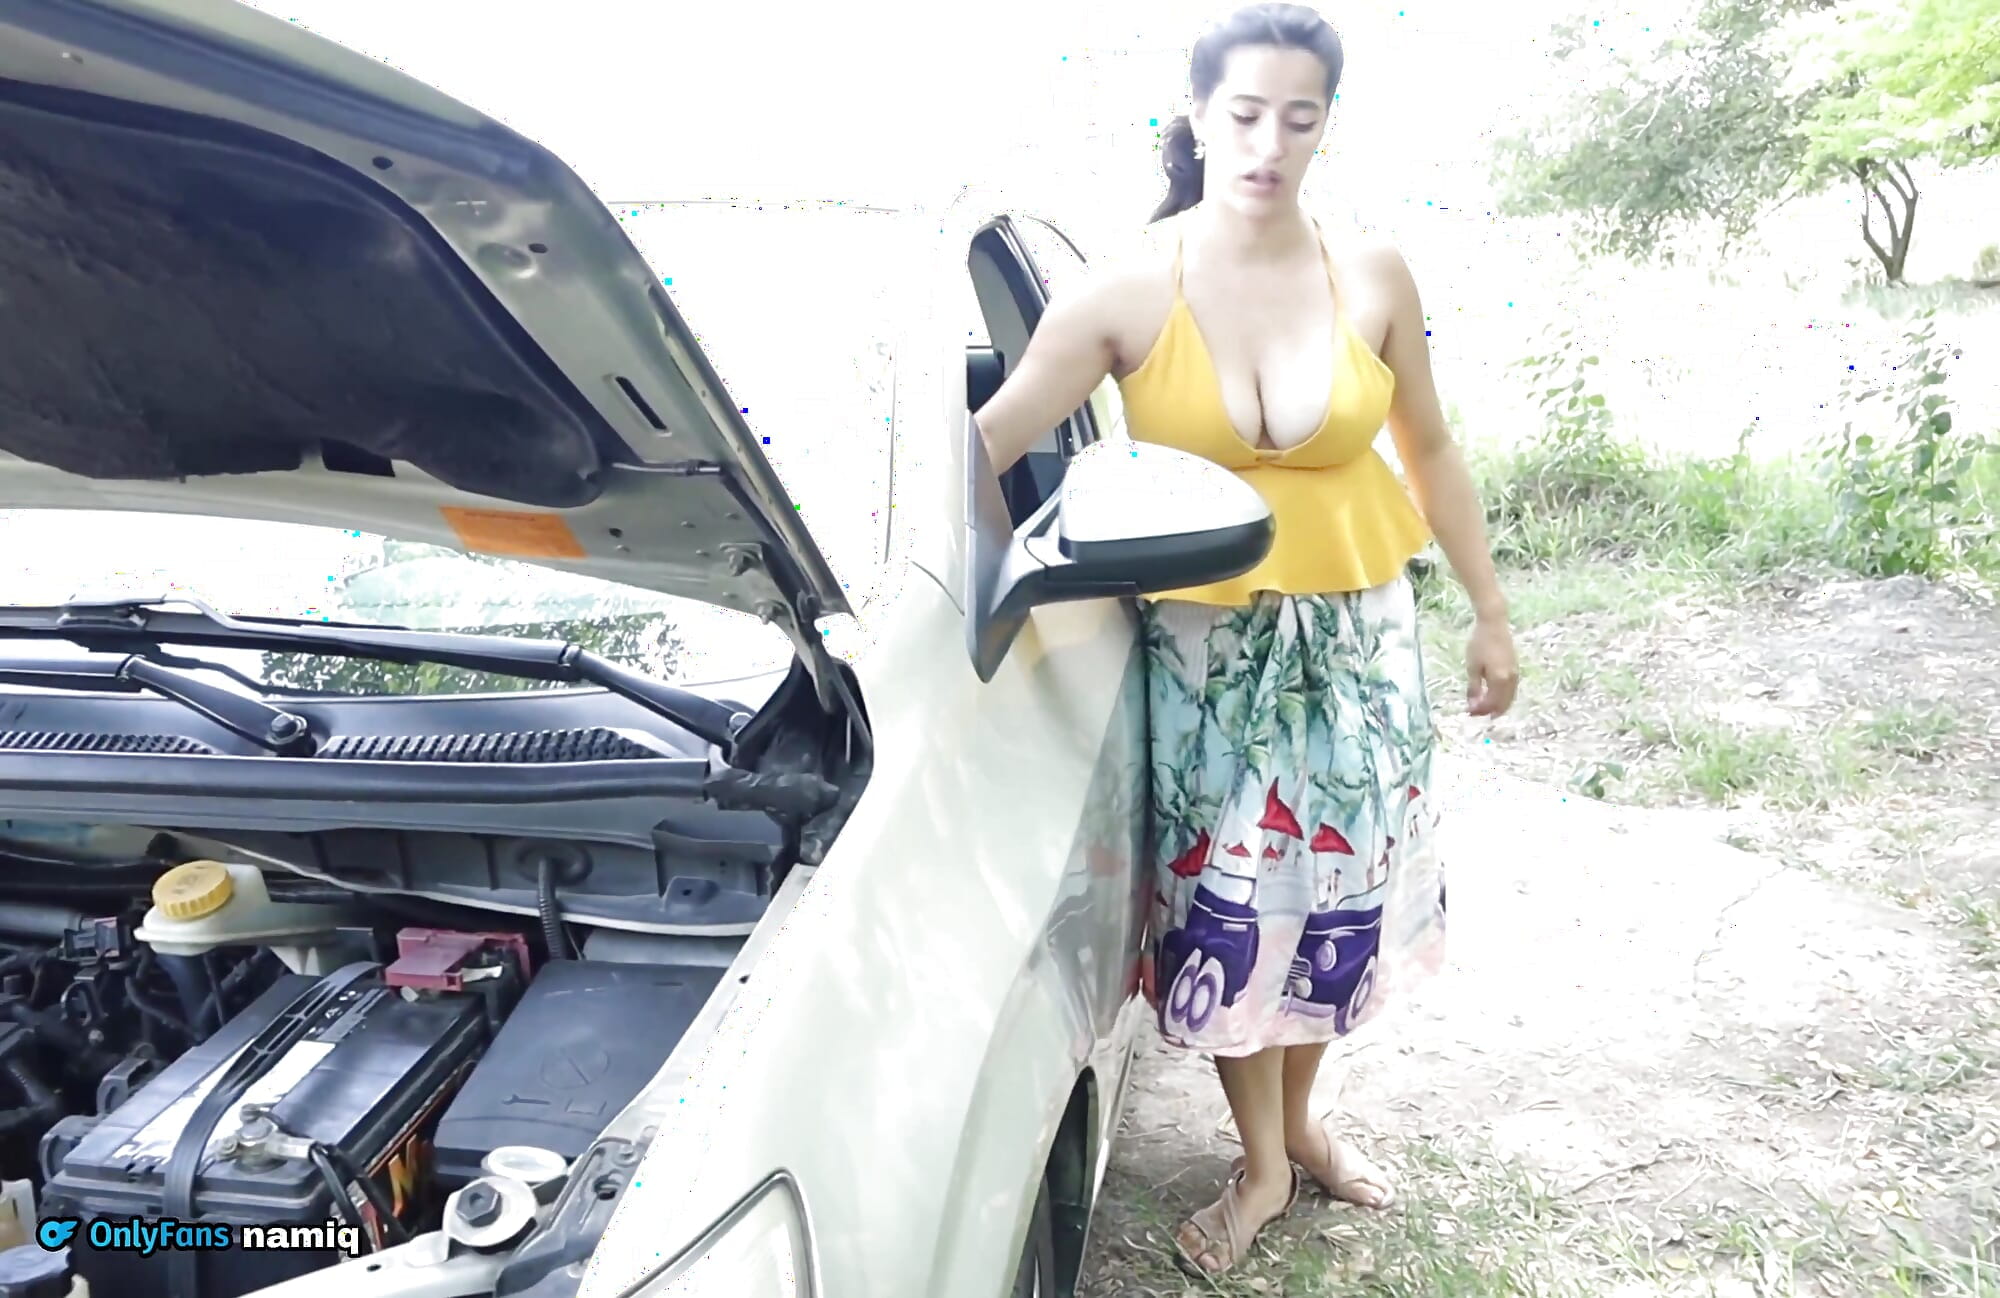 Mechanic fucks married woman stranded in the middle of nowhere